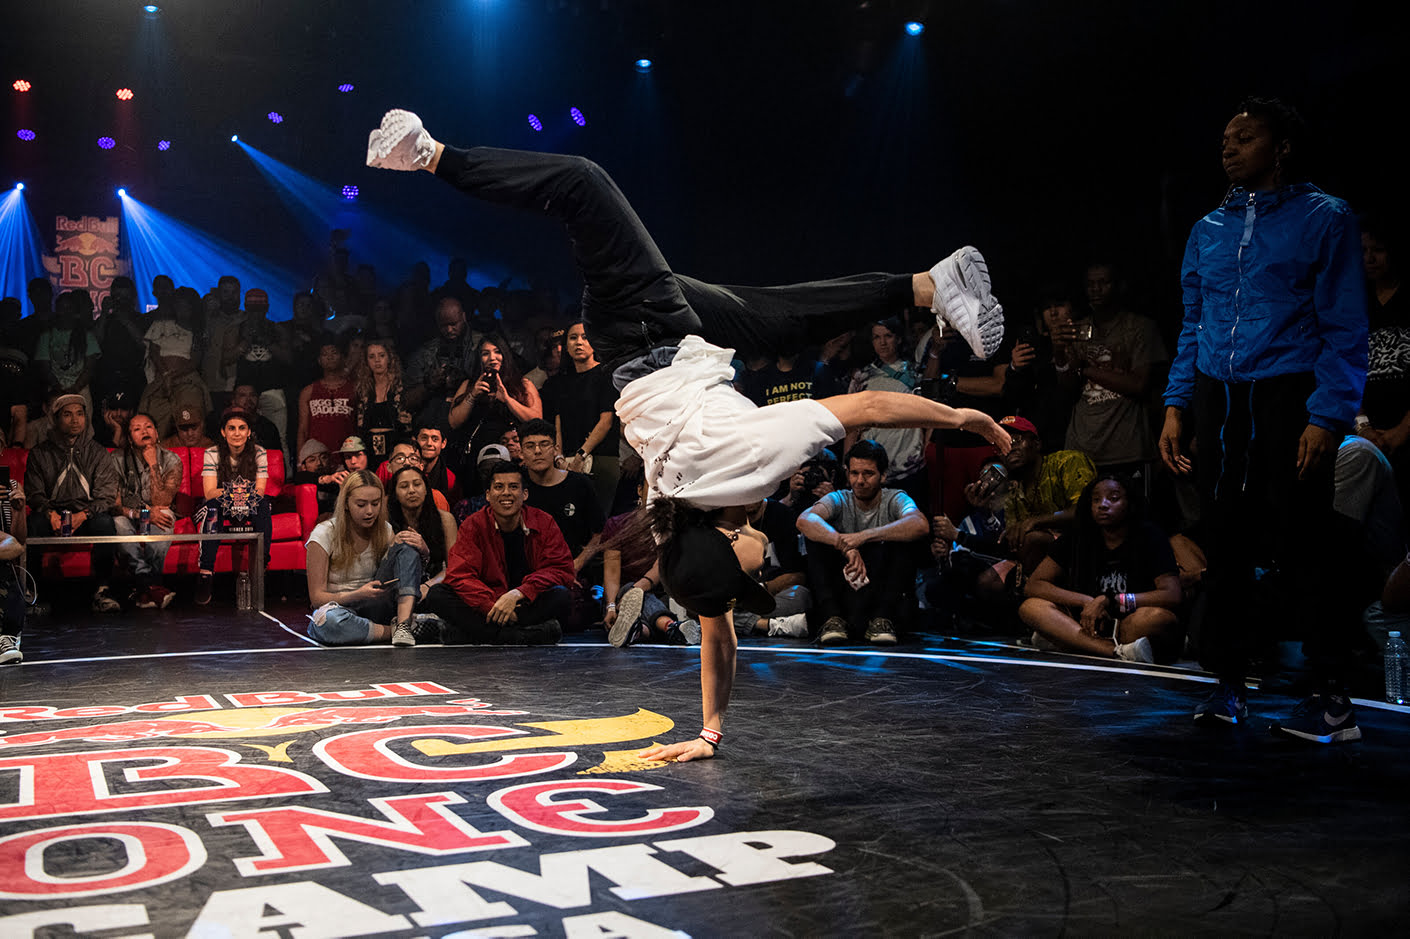 B-girl Sunny competes at the Red Bull BC One B-Girls Cypher USA in Houston, TX on May 18, 2019